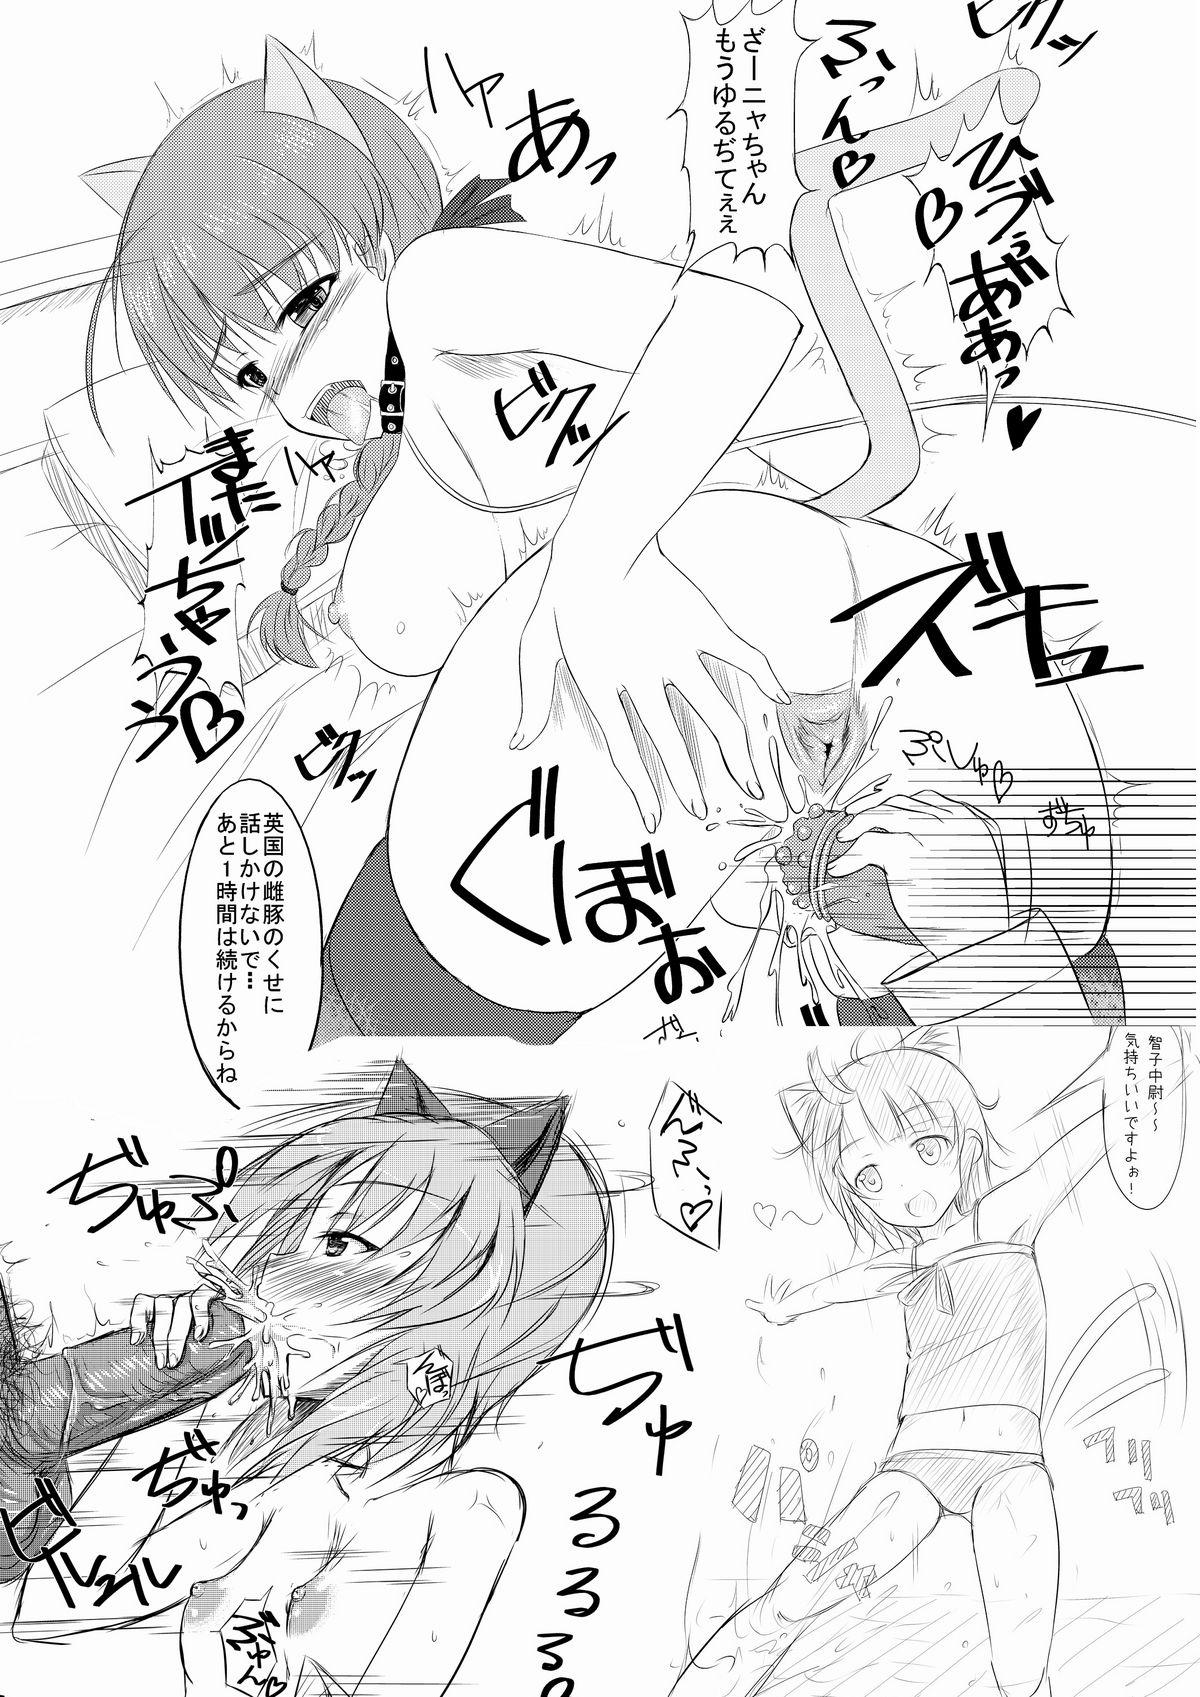 Gayemo 練習 お姉ちゃんとヘルマちゃん - Strike witches Porno 18 - Page 12